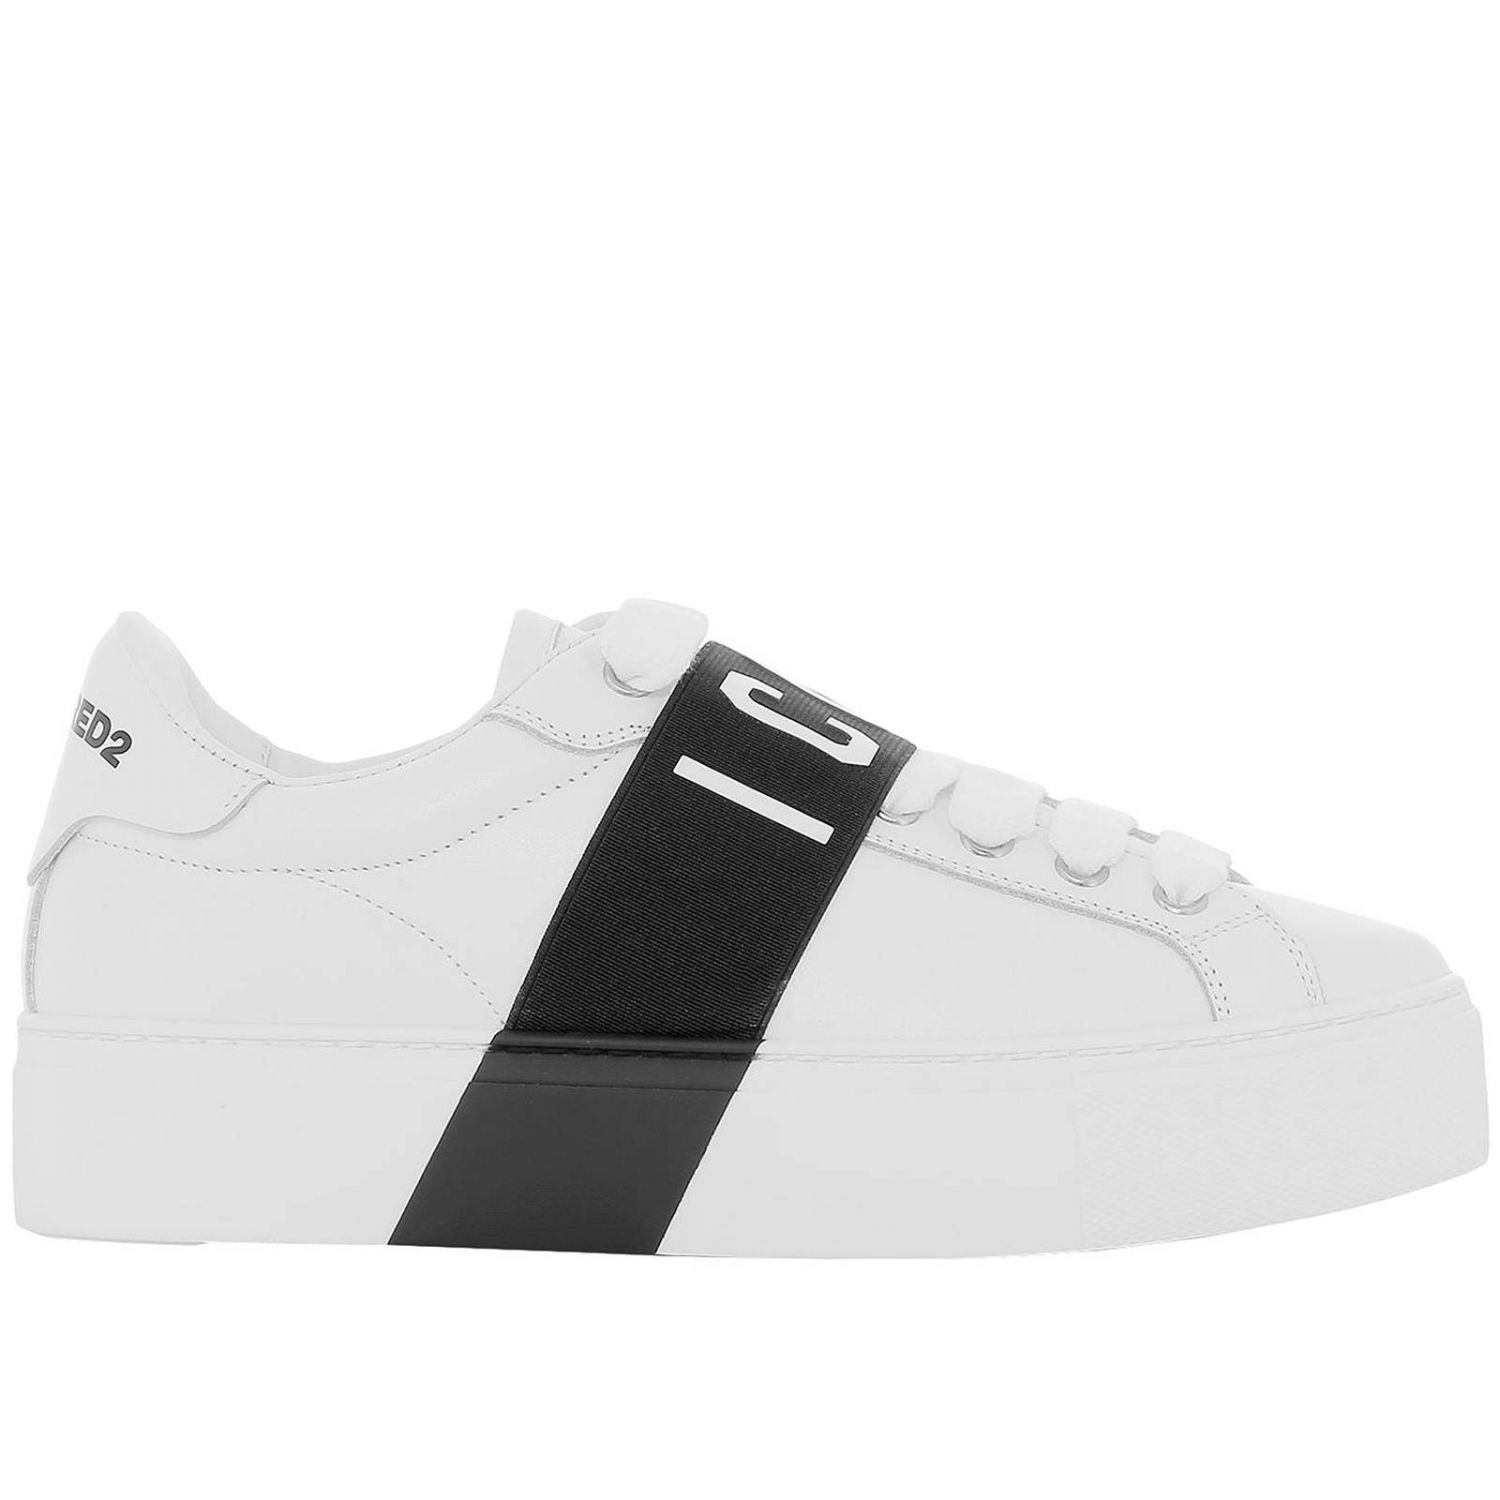 Dsquared2 for woman - White | Dsquared2 SNW002206500001 online GIGLIO.COM